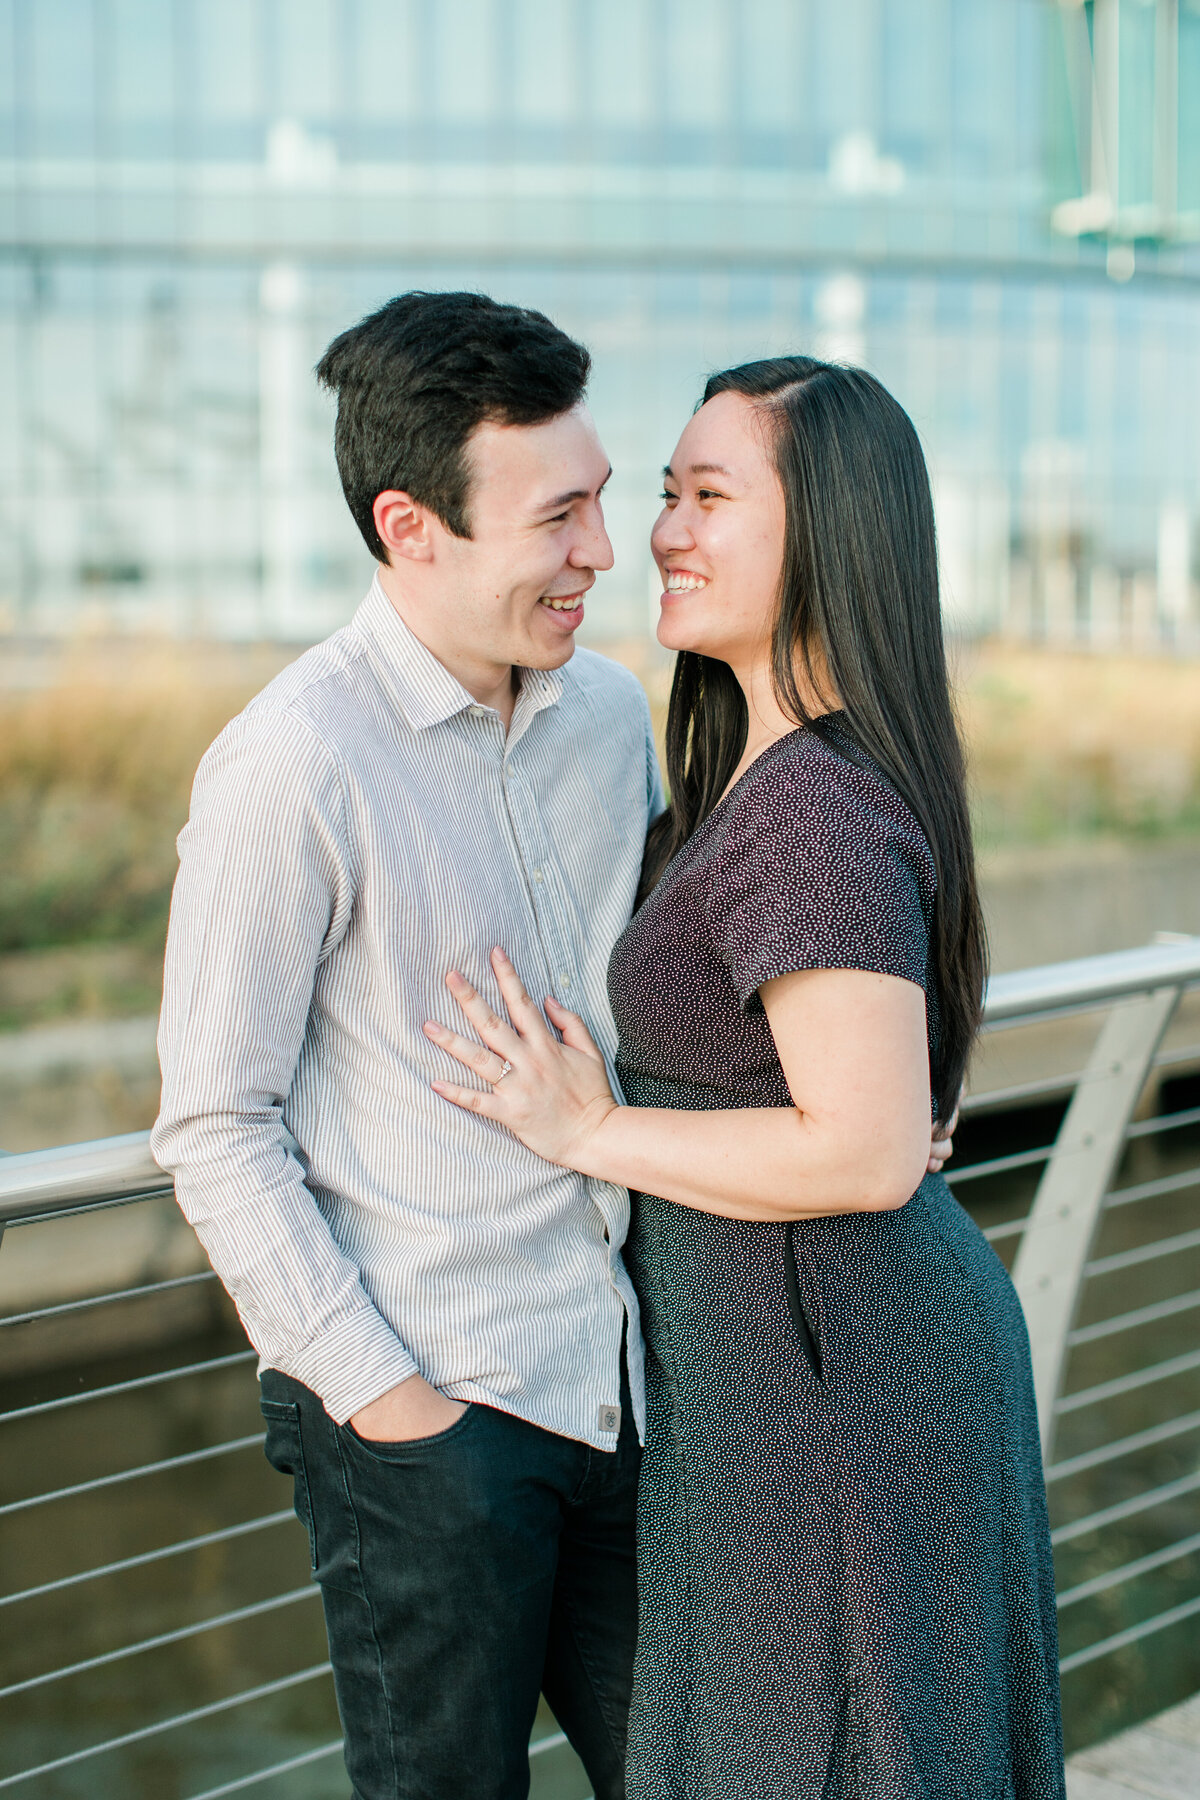 Becky_Collin_Navy_Yards_Park_The_Wharf_Washington_DC_Fall_Engagement_Session_AngelikaJohnsPhotography-7739